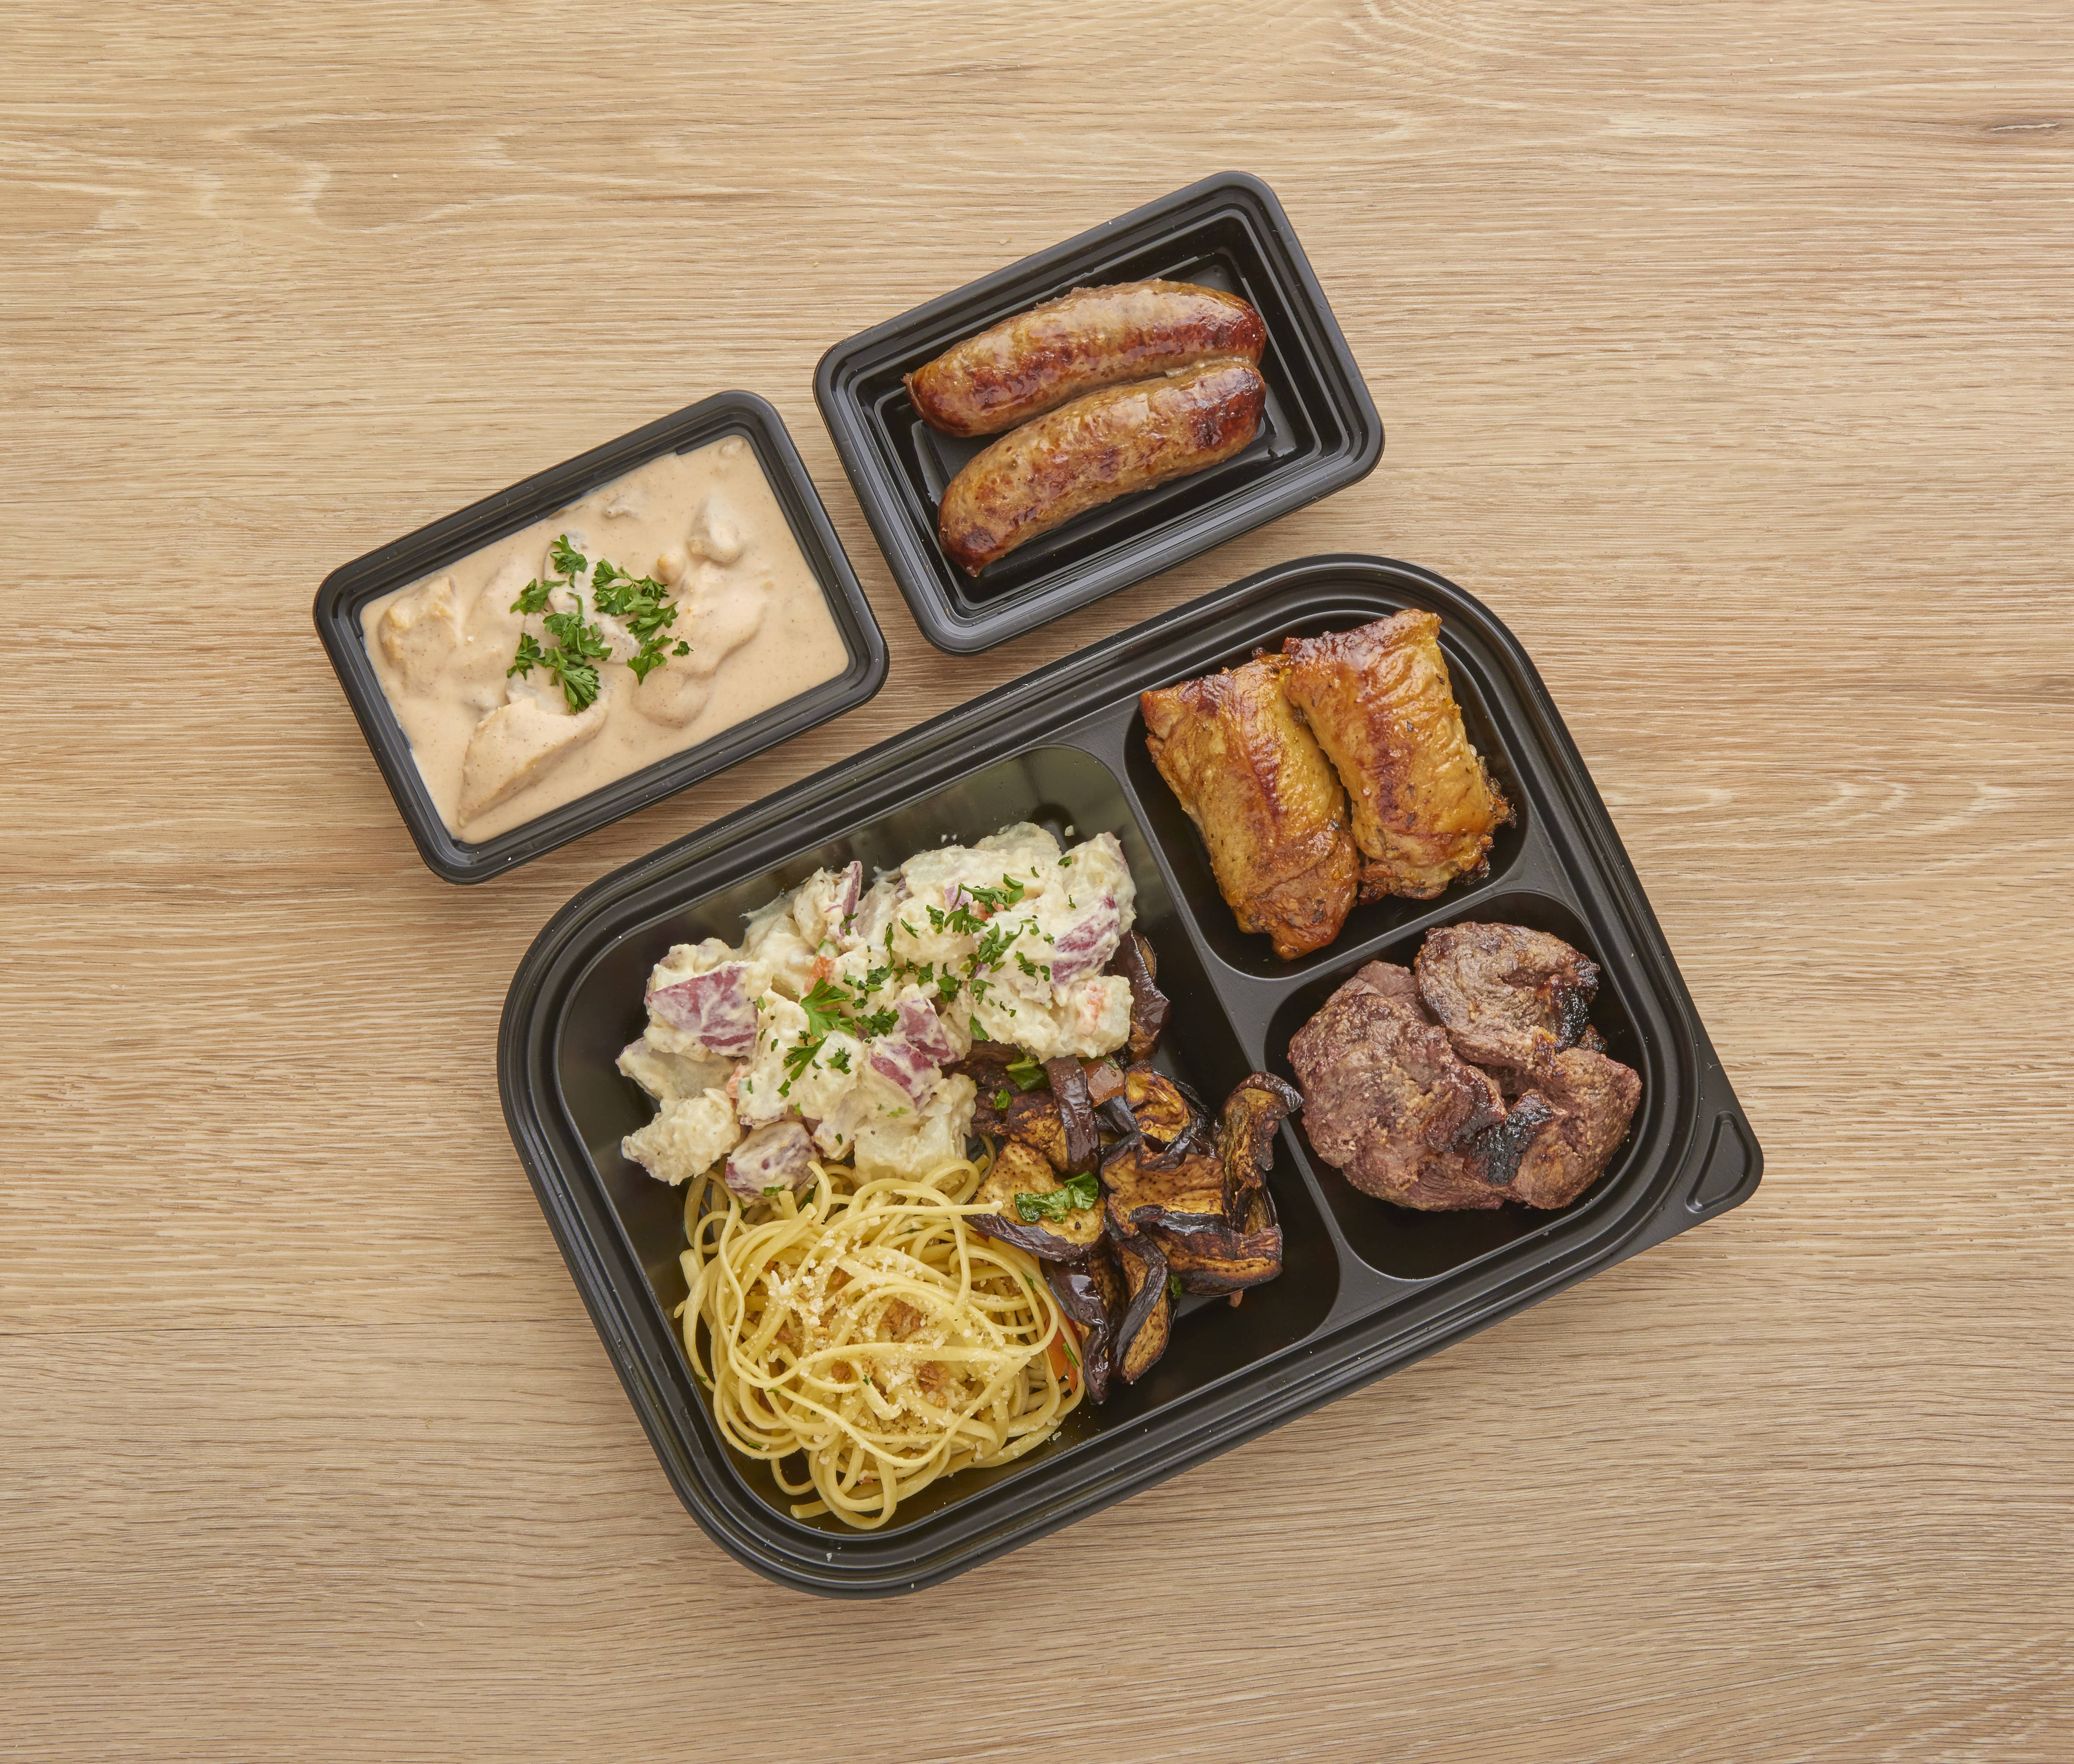 A plate of noodles, sausage, potato salad and meats